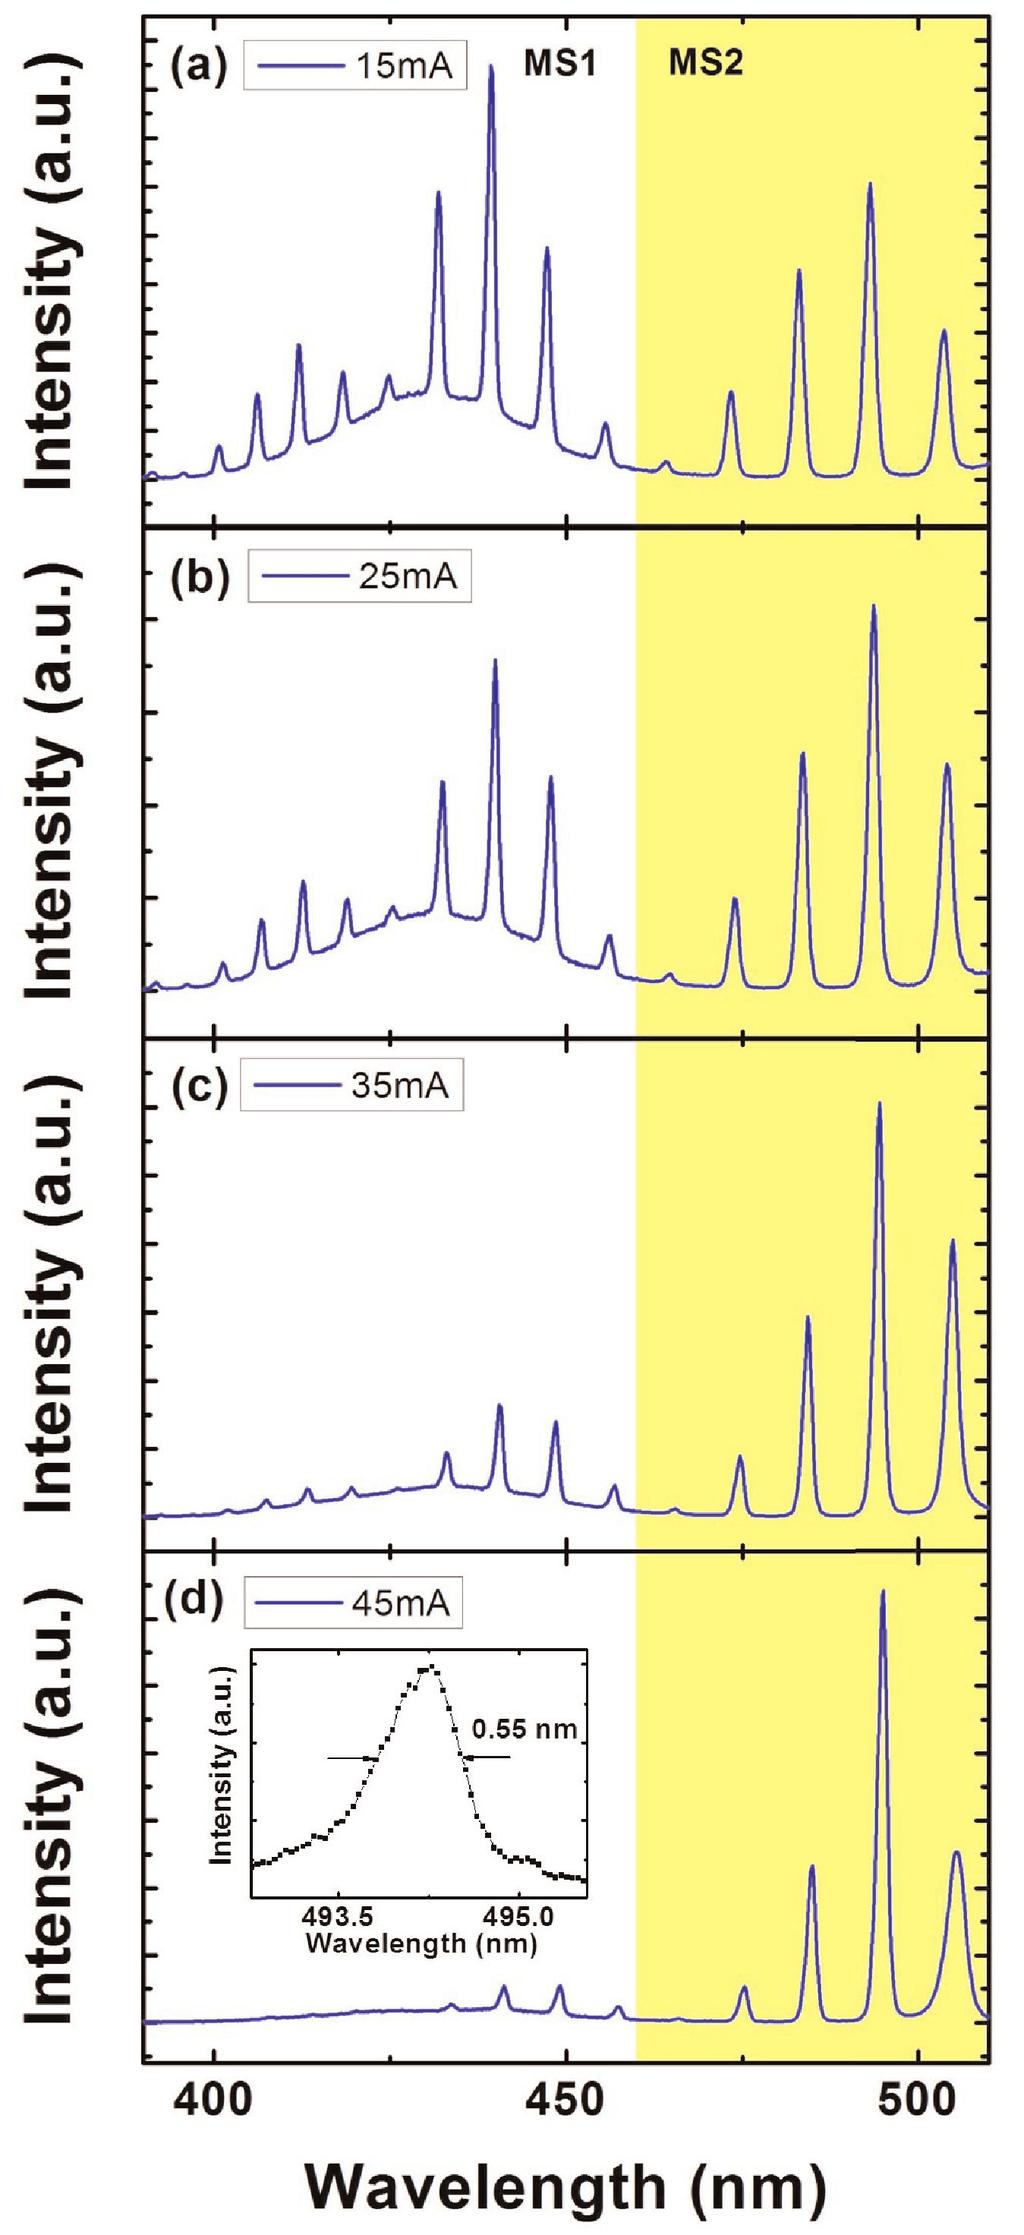 Technology focus: Lasers 79 (SINANO) in China have developed near-green VCSELs using material that is mainly luminescent in the blue 445nm part of the spectrum [Rongbin Xu et al, IEEE Transactions on